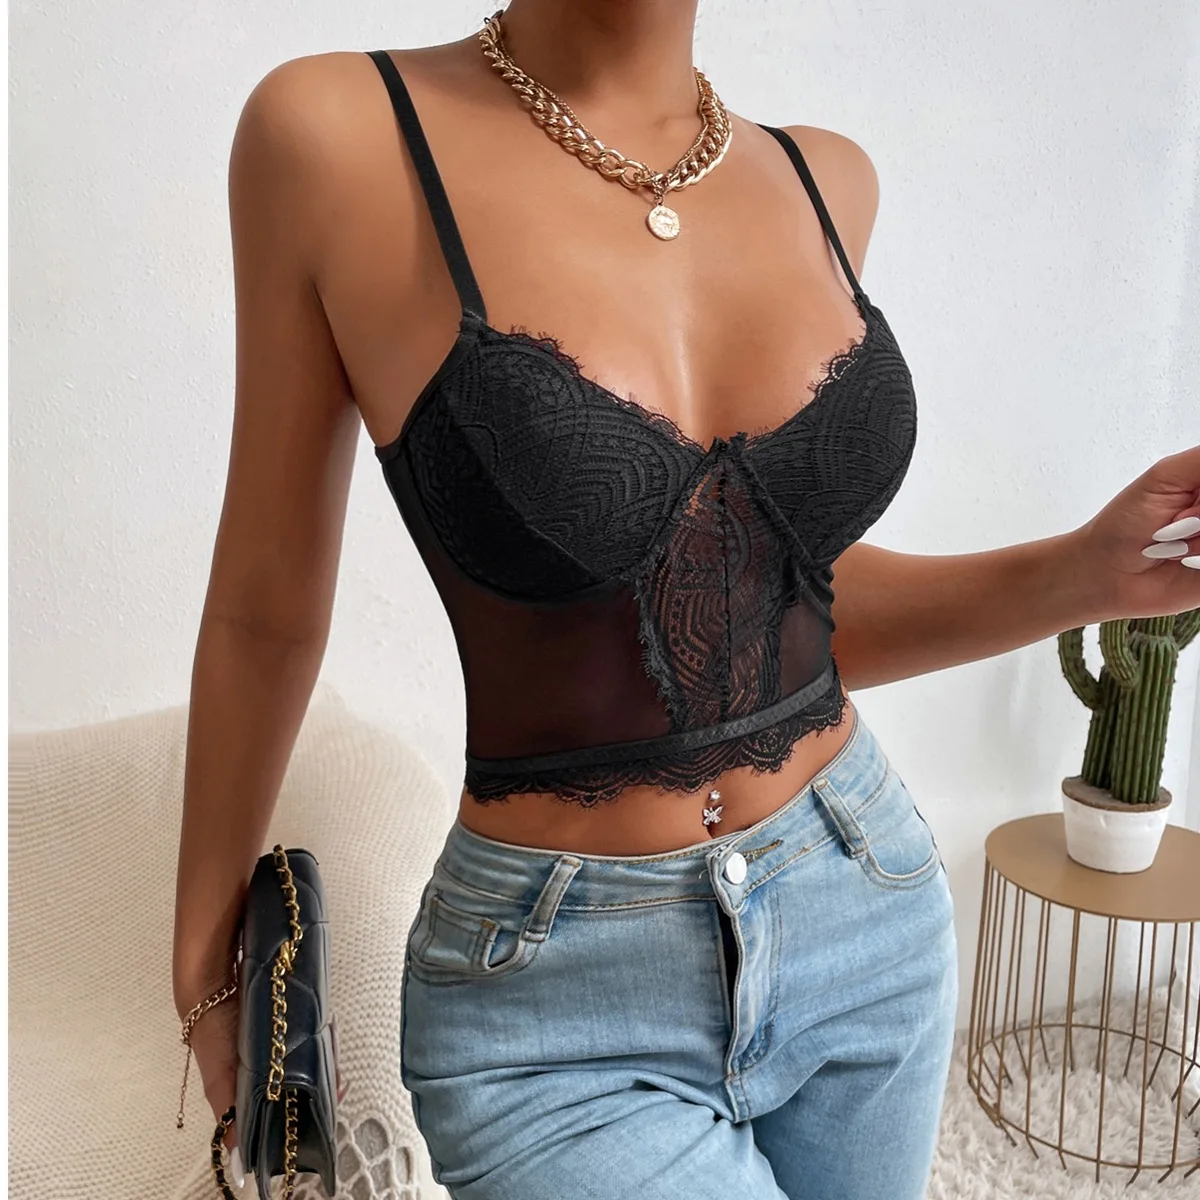 

Lace Tank Top Women Sexy Cropped Mesh Bras Push Up Sheer Tops Perspective Camisole Sexi Nightclub Lingerie Backless Streetwear